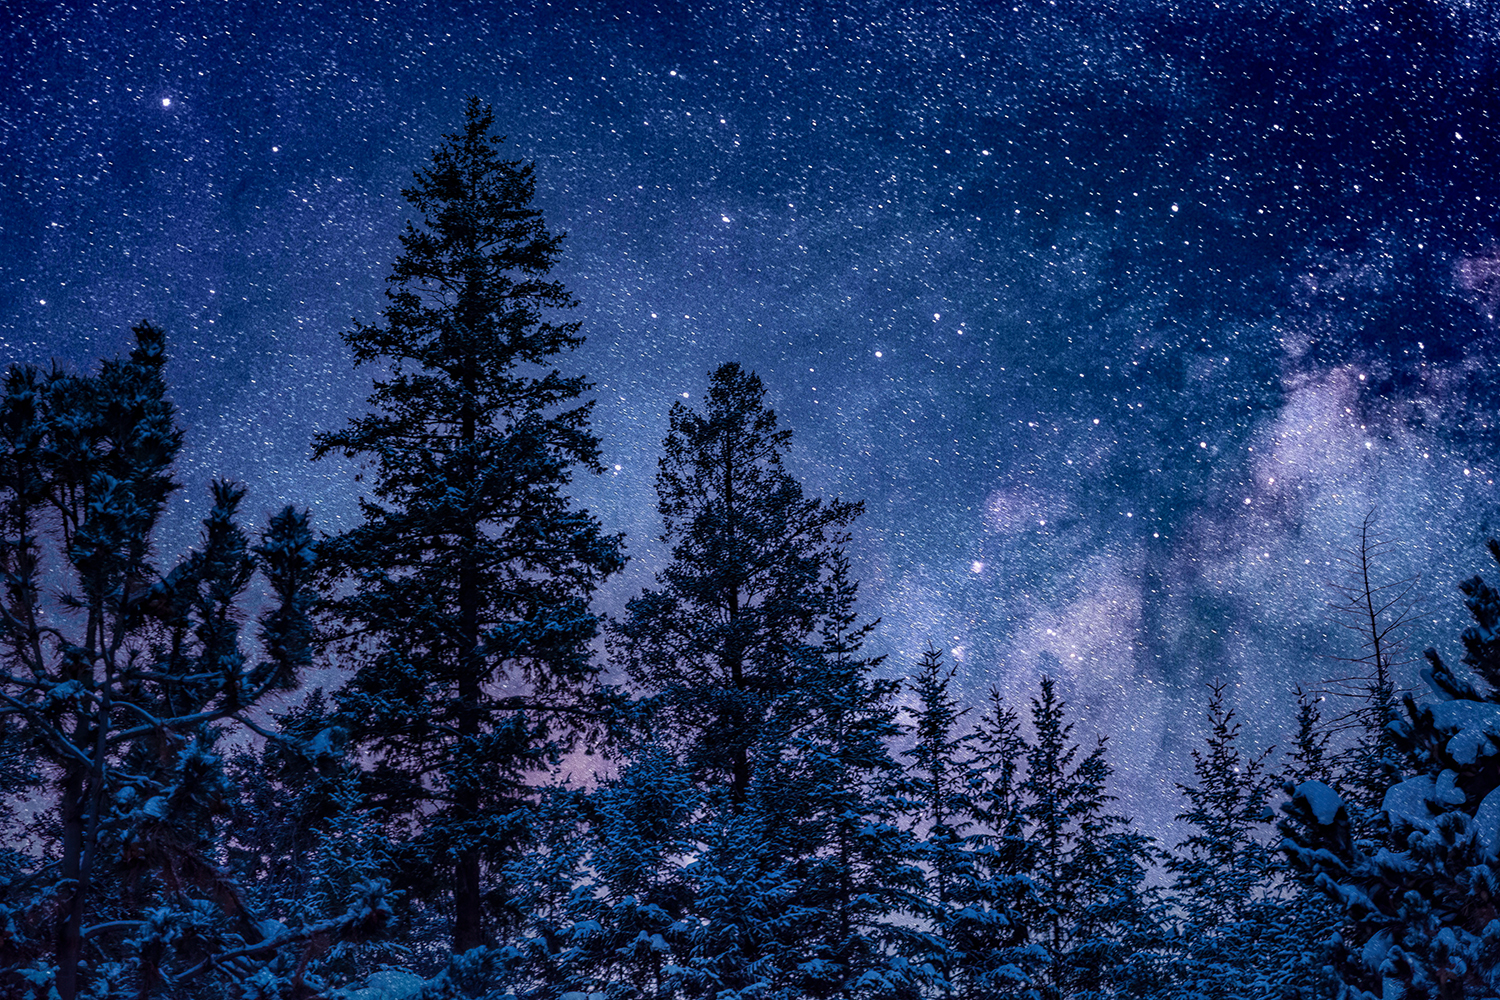 Kamloops Landscape night sky with trees and stars with galaxy view